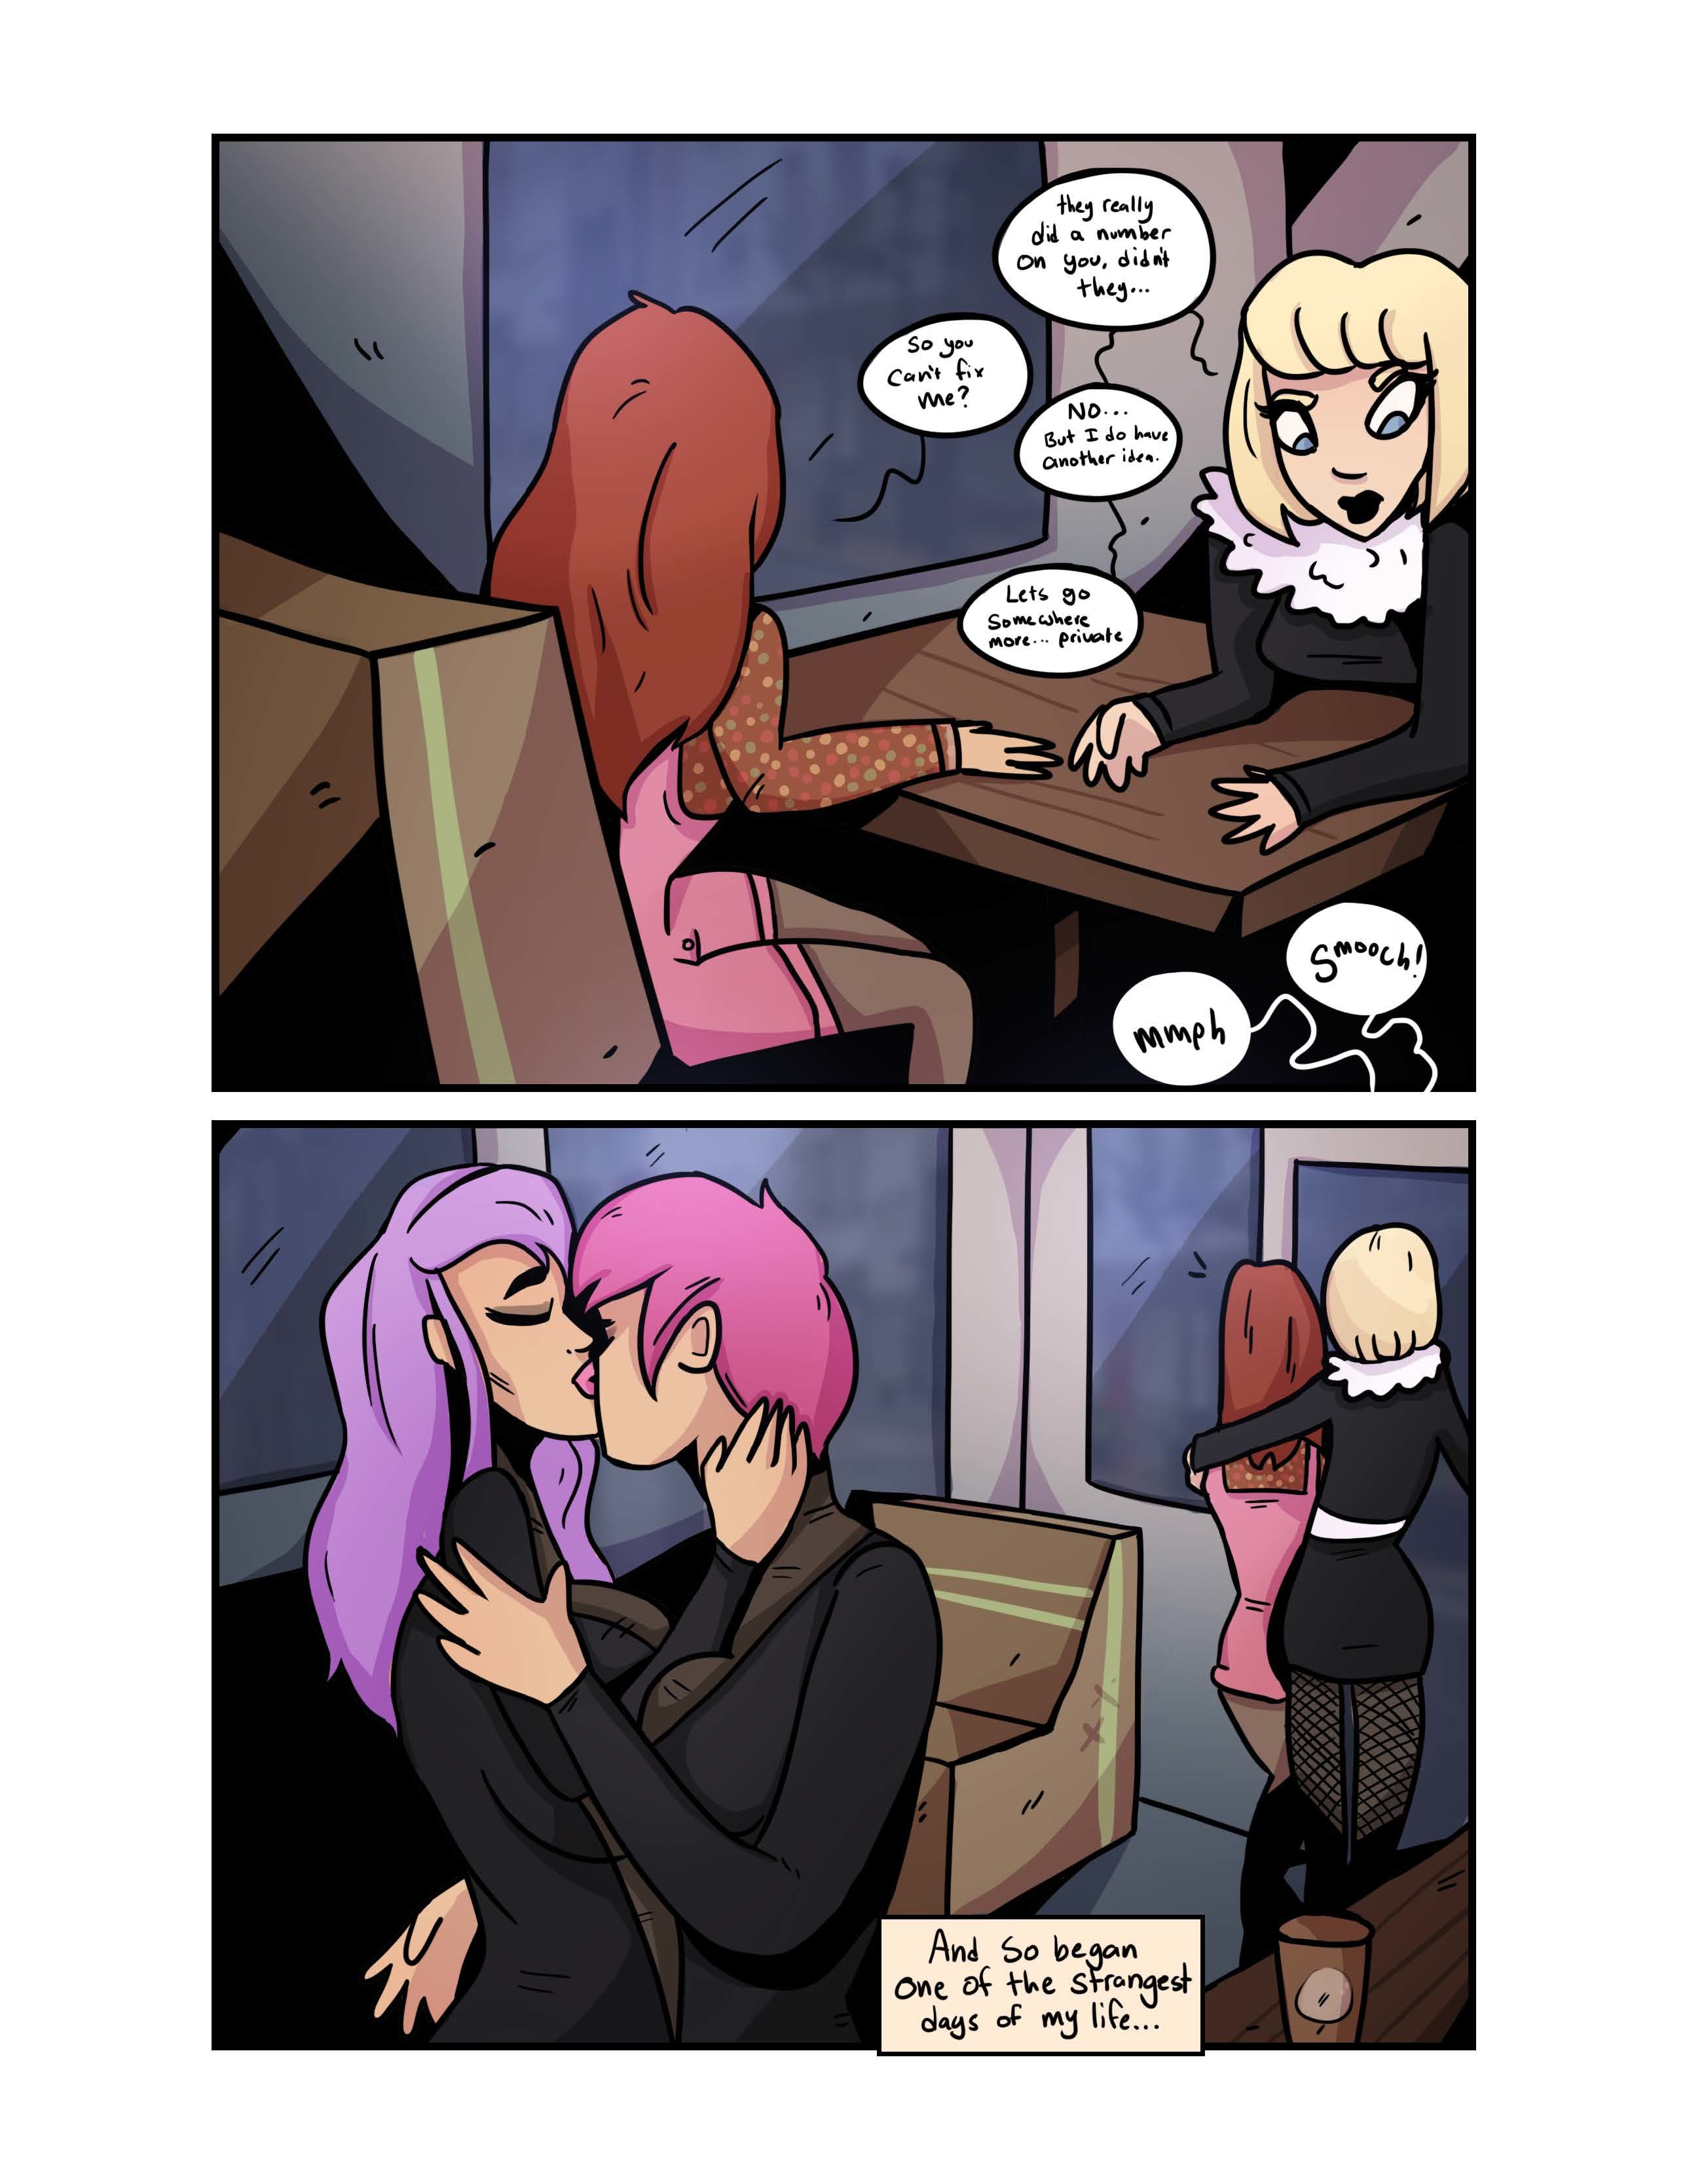 The New Girl Issue 1-5 by Grumpy TG page 34